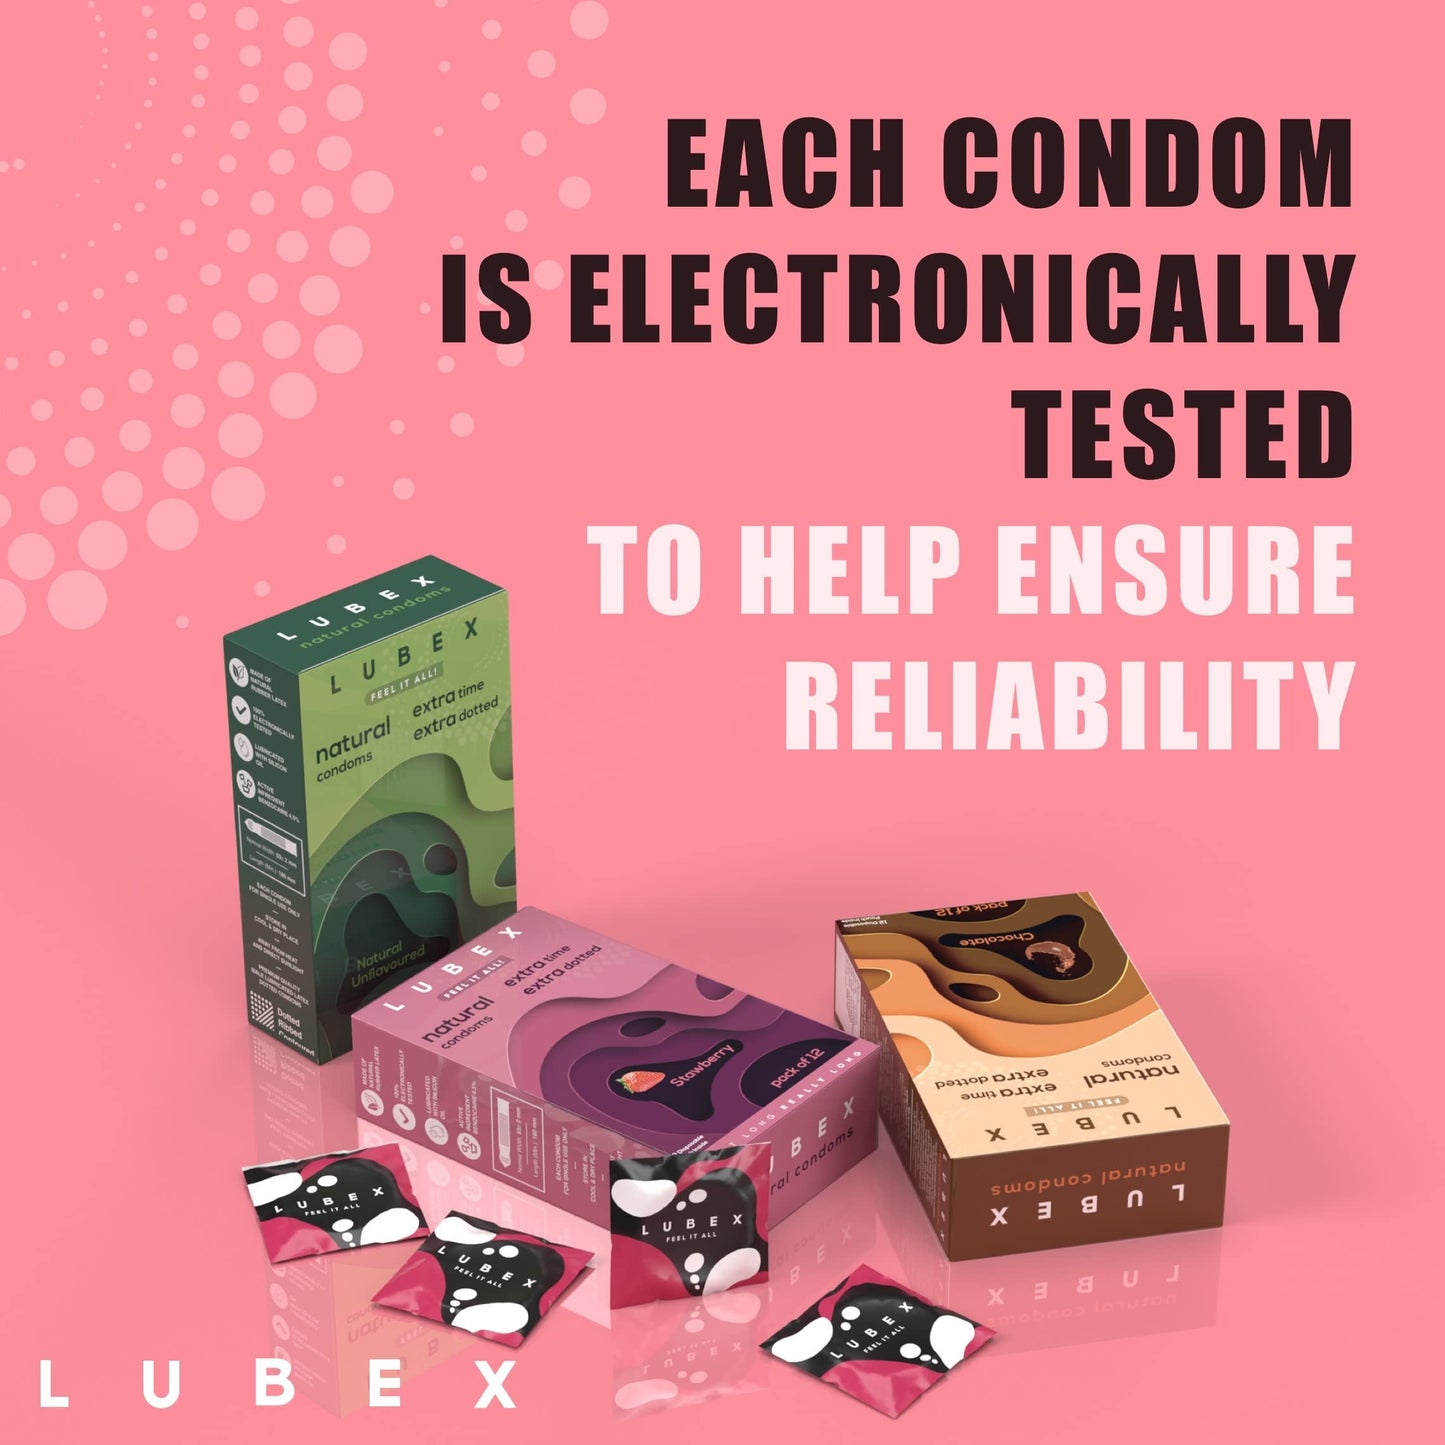 Lubex 6 in 1 Extra Time Condoms with Disposable Bags - Ultra Thin & Extra Dotted - Natural Unflavoured - 36 Condom (Pack of 3)